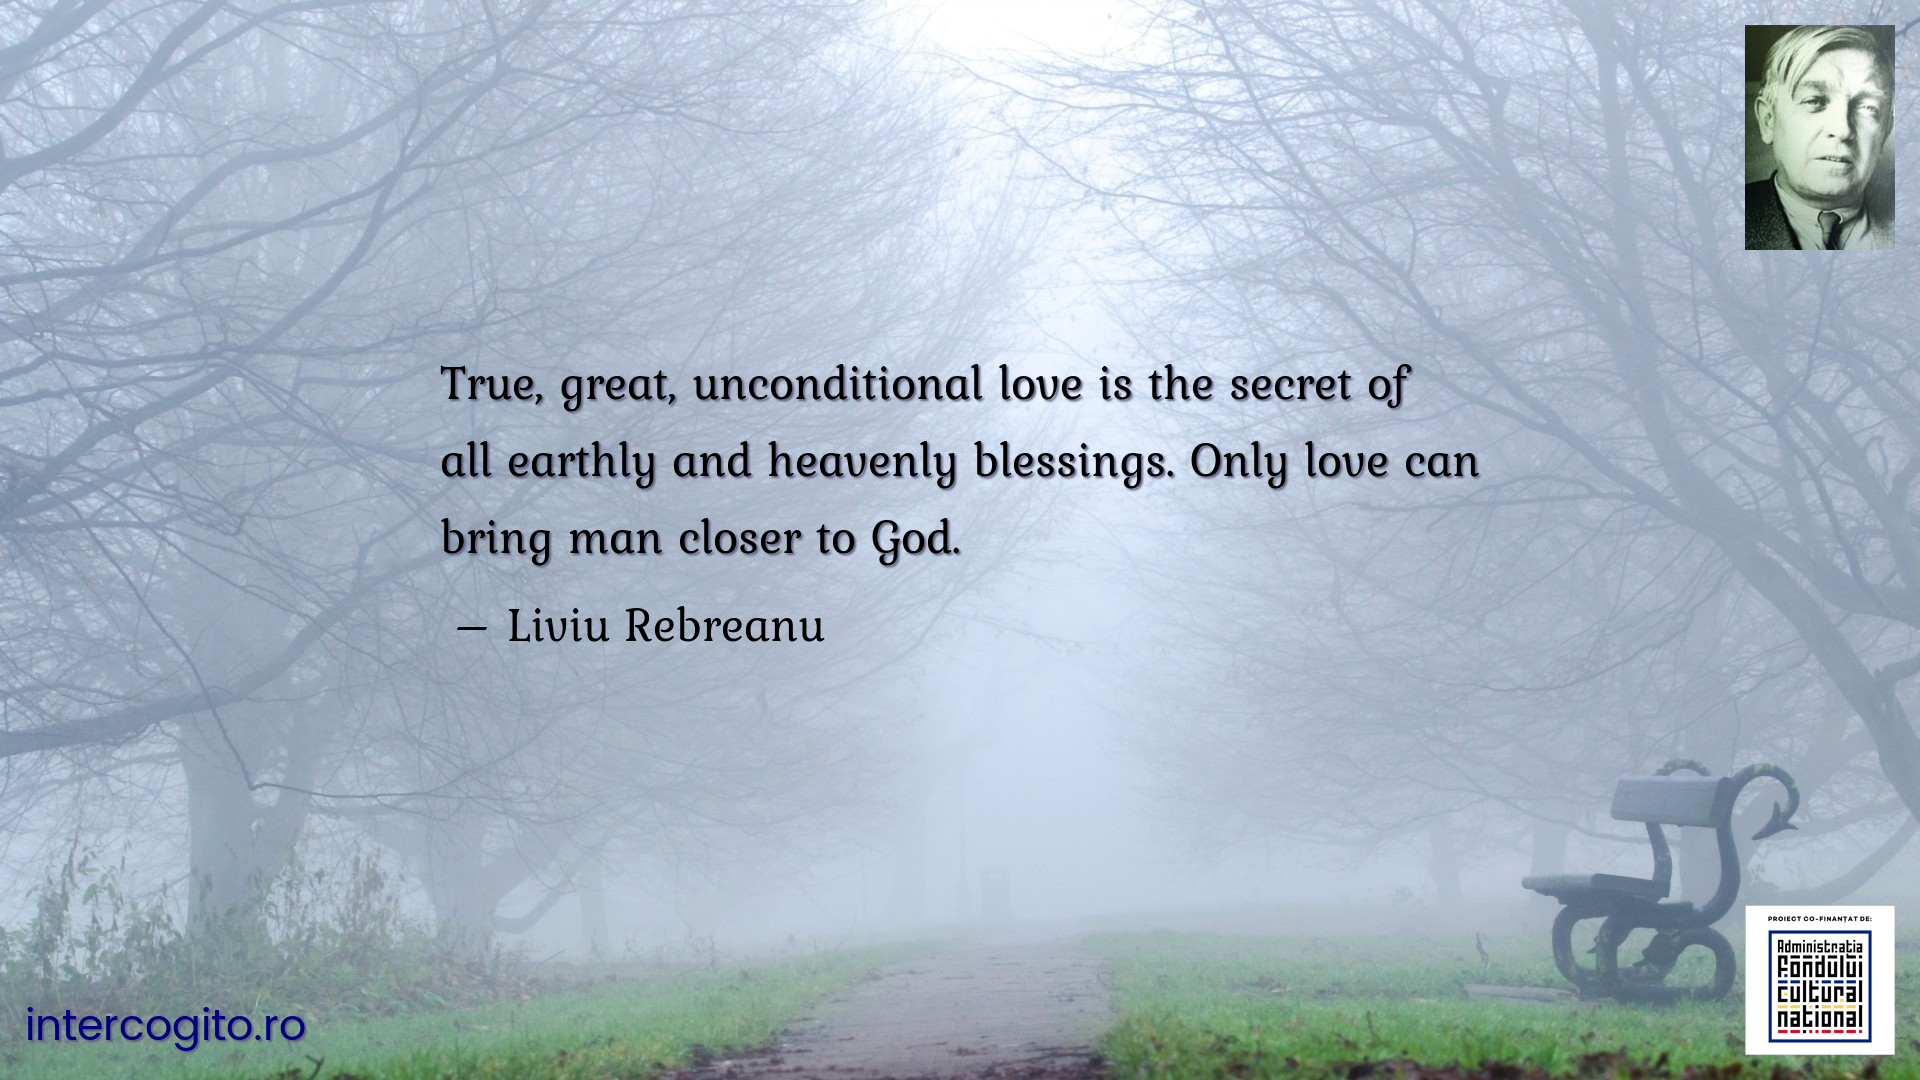 True, great, unconditional love is the secret of all earthly and heavenly blessings. Only love can bring man closer to God.